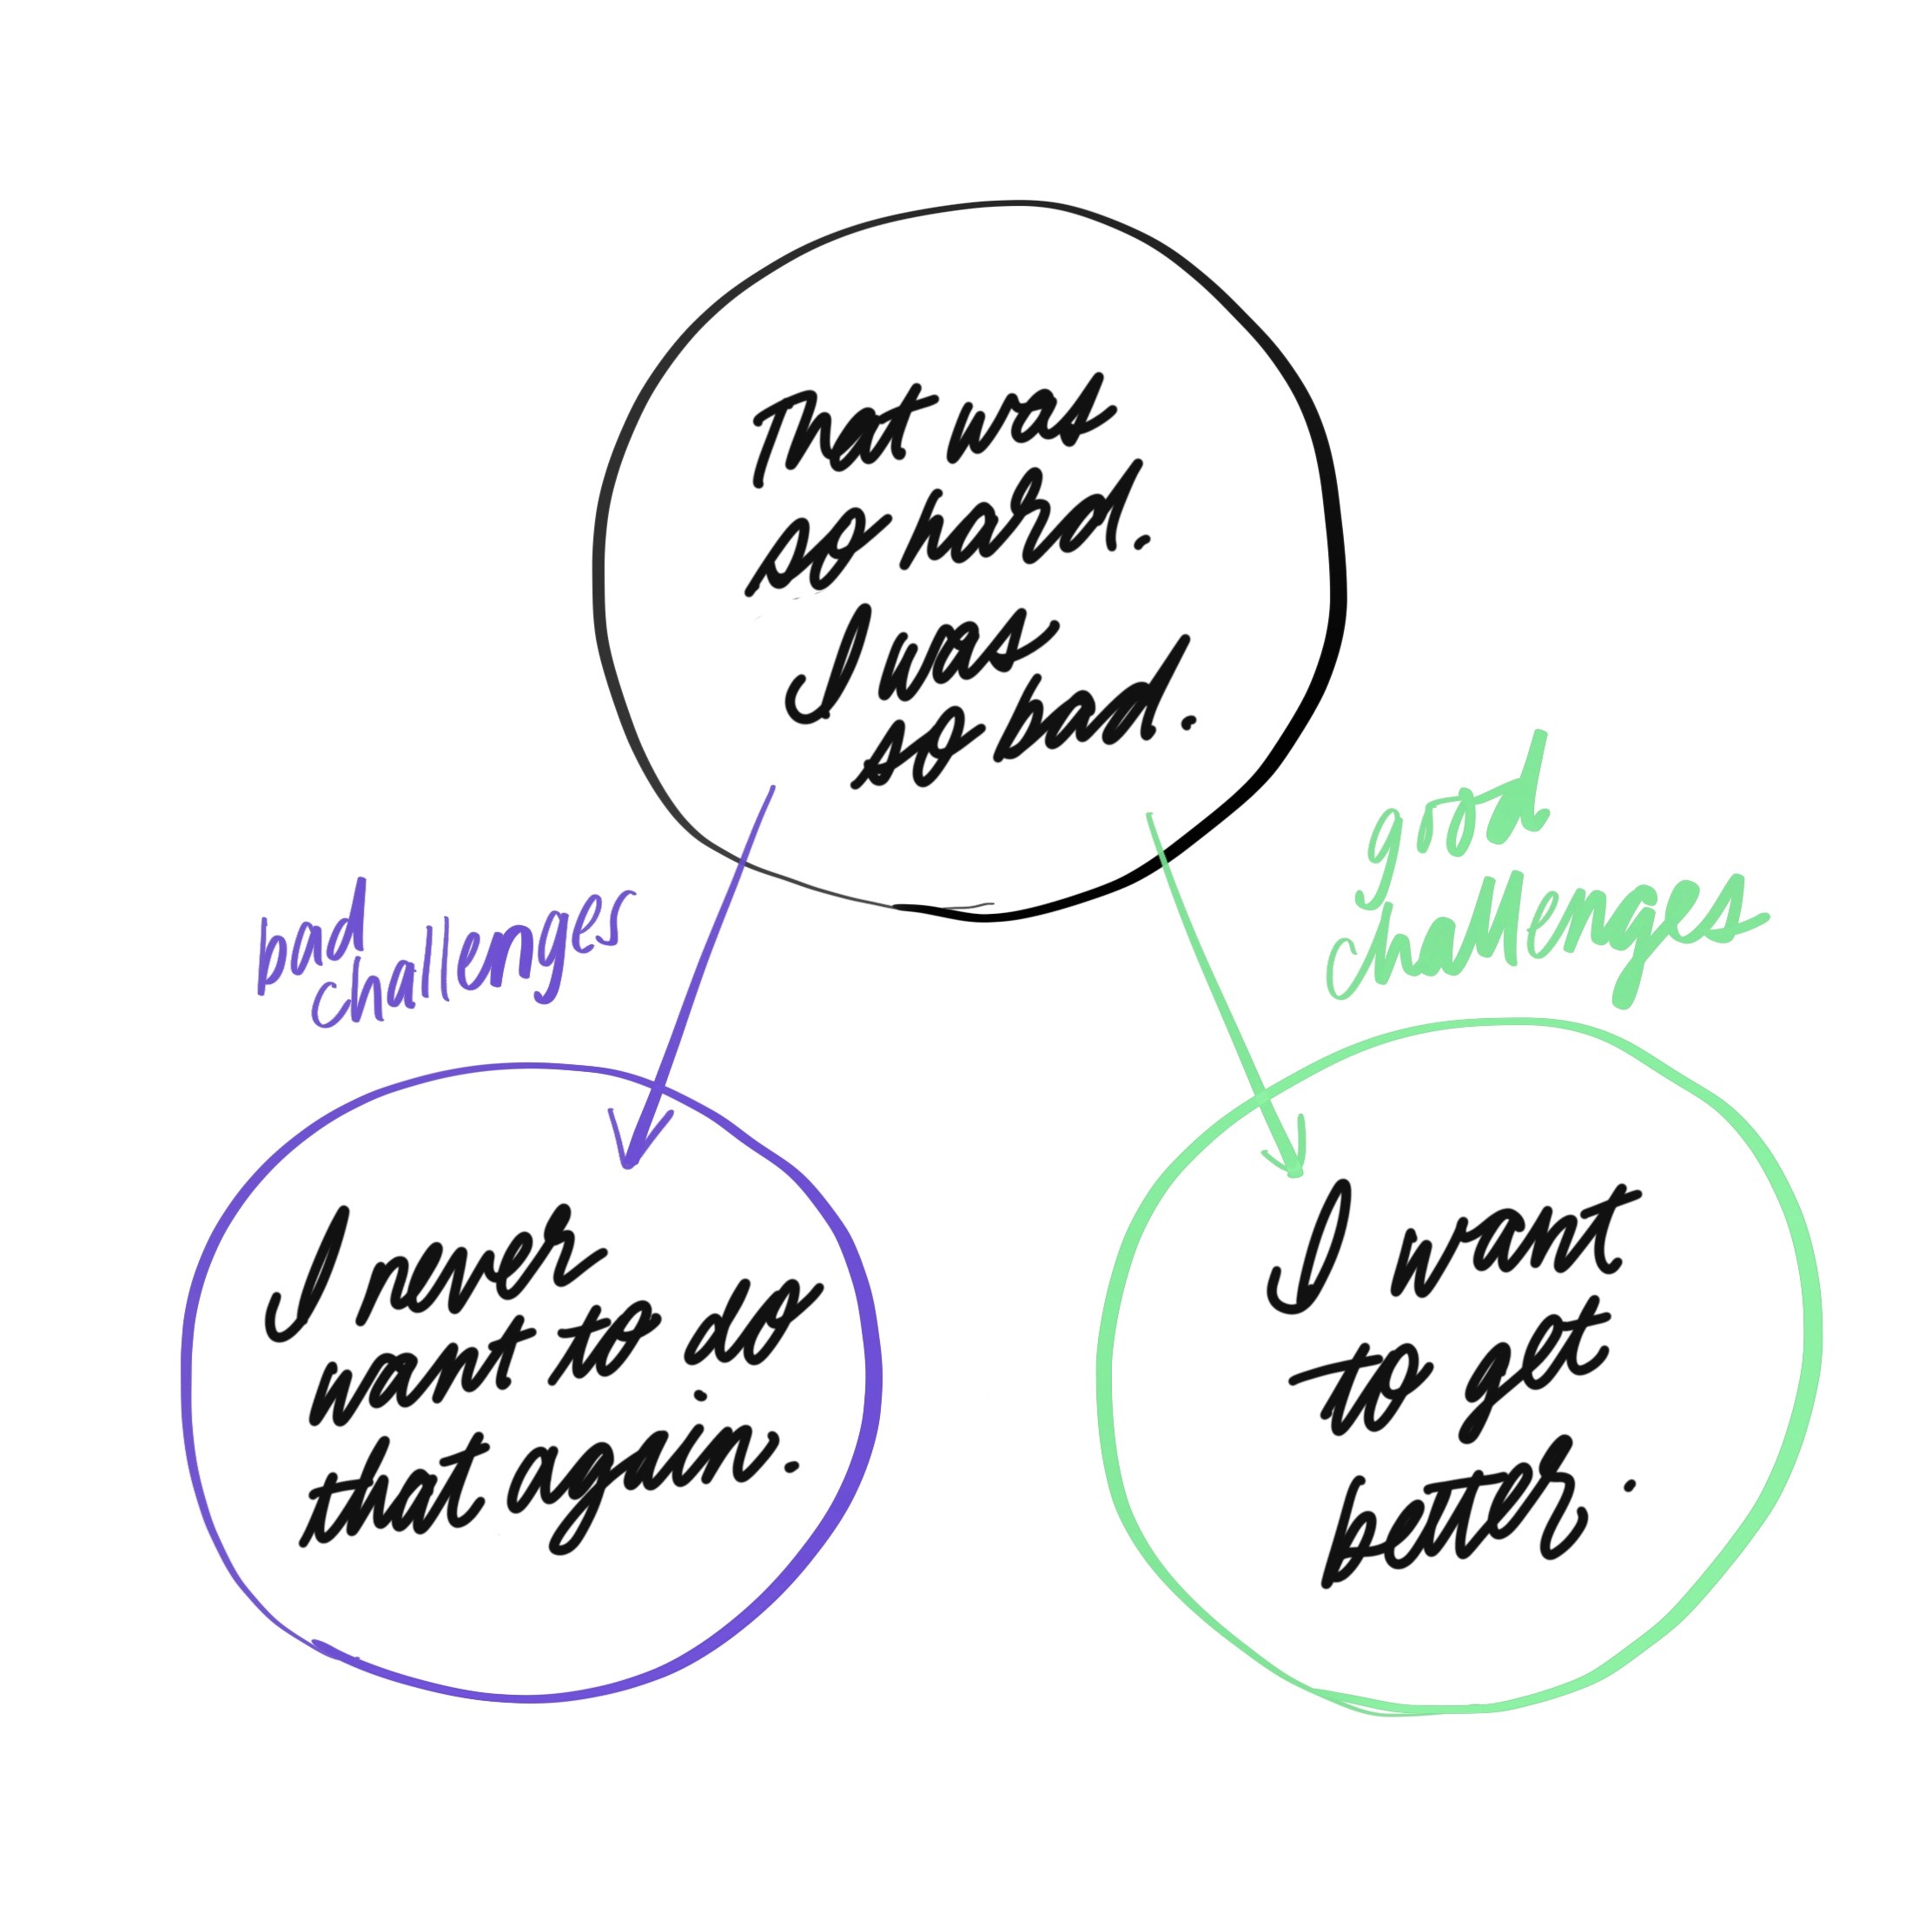 A hand-drawn diagram: A circle at the top that says “Wow, that was so hard. I was so bad” inside it. Under, there are two circles on either side: purple on the left, green on the right. Inside the purple circle, it says “I never want to do that again;” inside the green, “I want to get better.” There’s a purple arrow pointing to the purple circle labeled “Bad challenges” and a green arrow pointing to the green circle labeled “Good challenges.” 